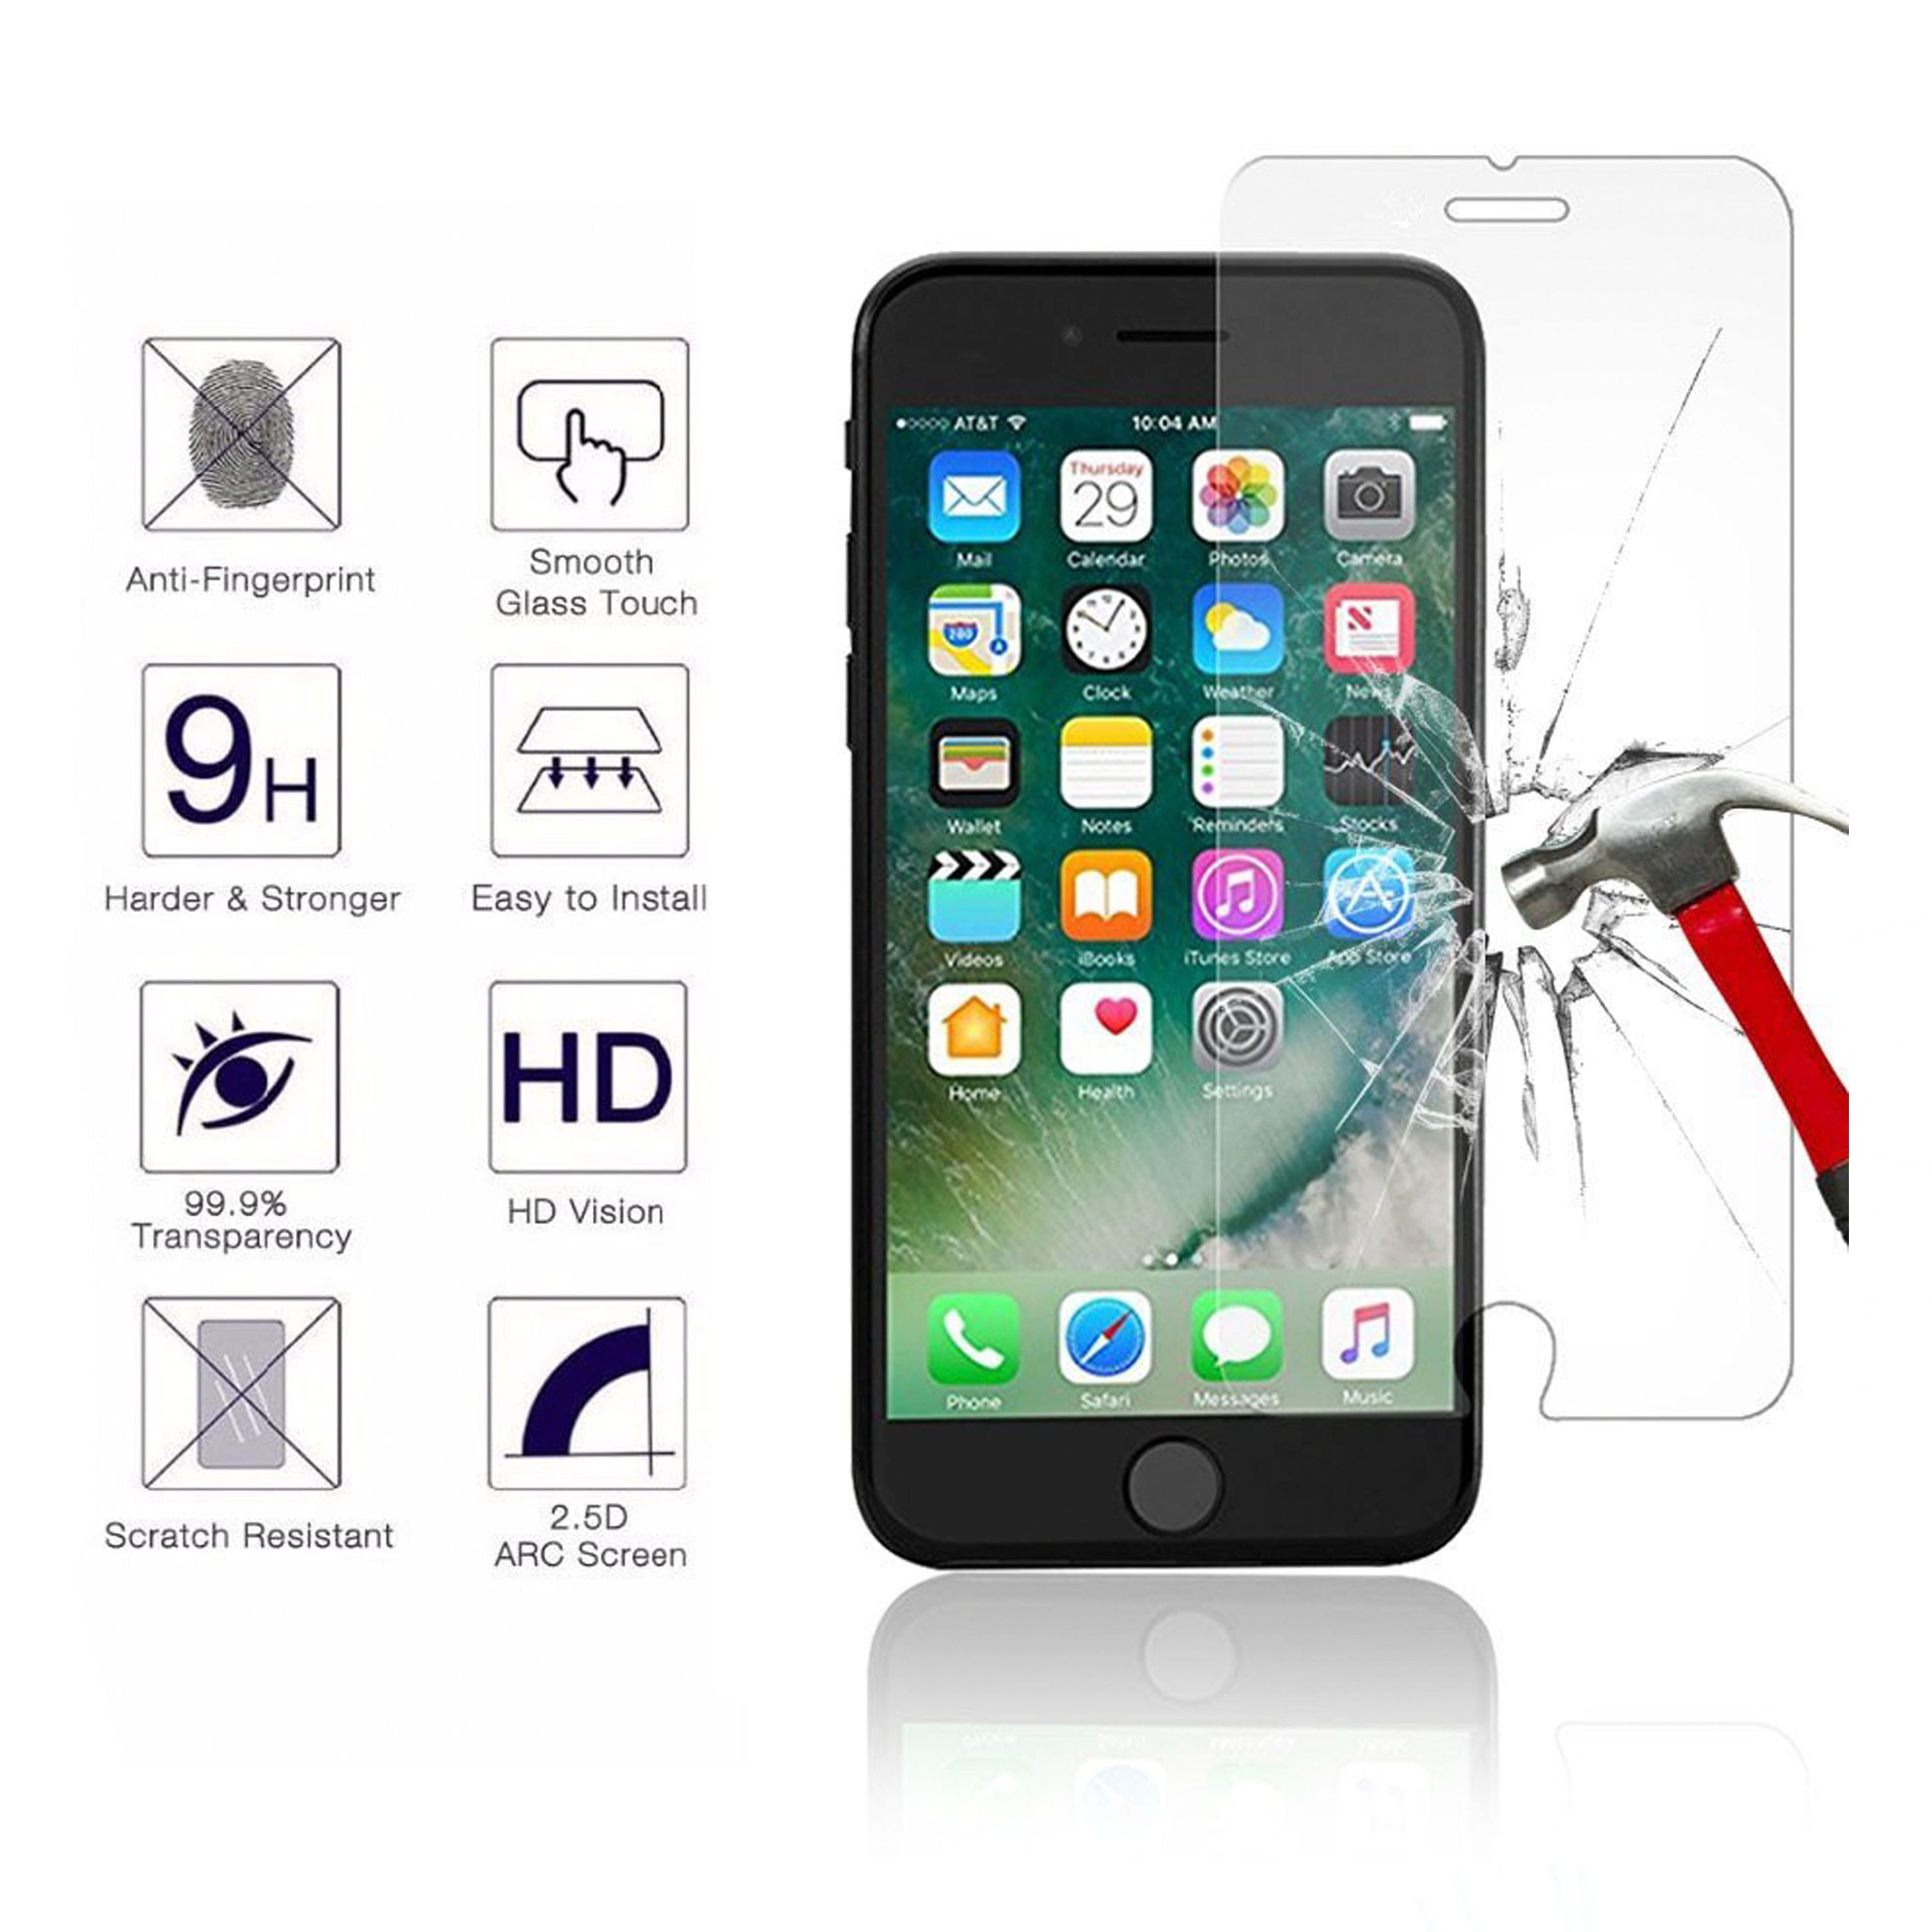 Glass Screen Protector for iPhone 6/7/8 Plus or iPhone 6s/7s/8s Plus 3 Pack Easy Installation & Fits Most Cases Tempered Glass with Accurate Touch and Anti-Scratch and Anti-Smudge